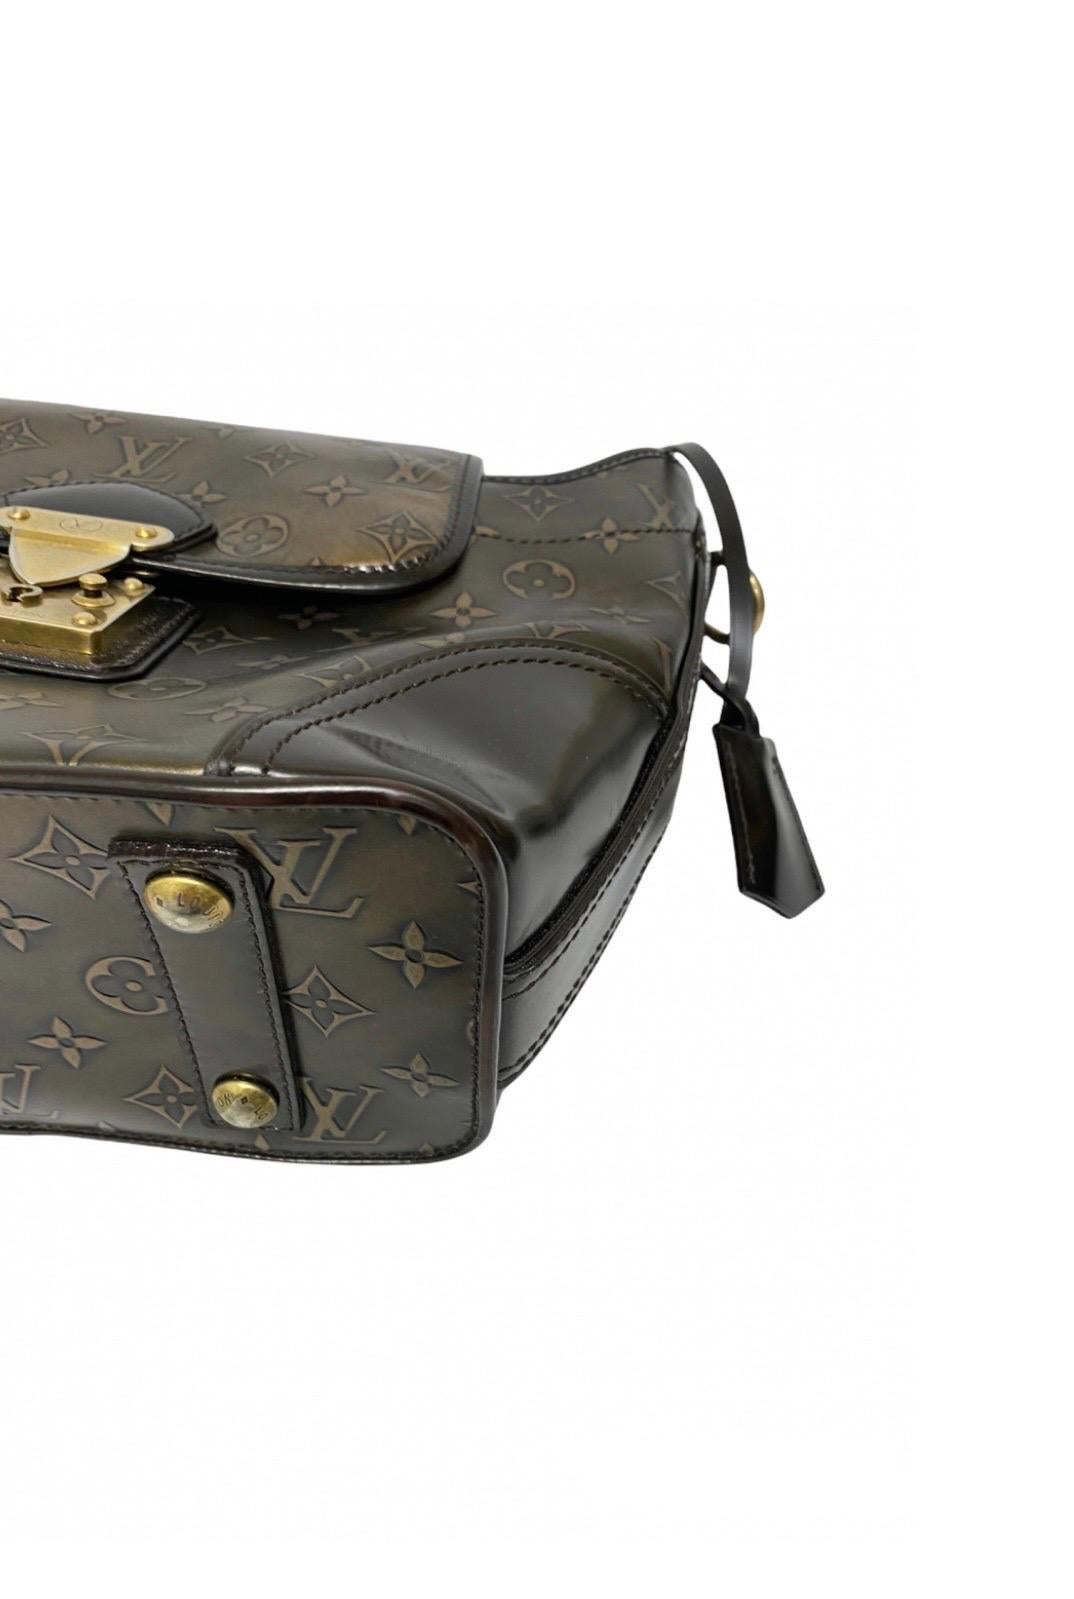 From the 2007 Prefall collection this super chic Louis Vuitton Sergent PM model bag features the classic Monogram on antiqued bronzed leather with metal engravings with deep chocolate leather trim with golden hardware. The military-inspired bag